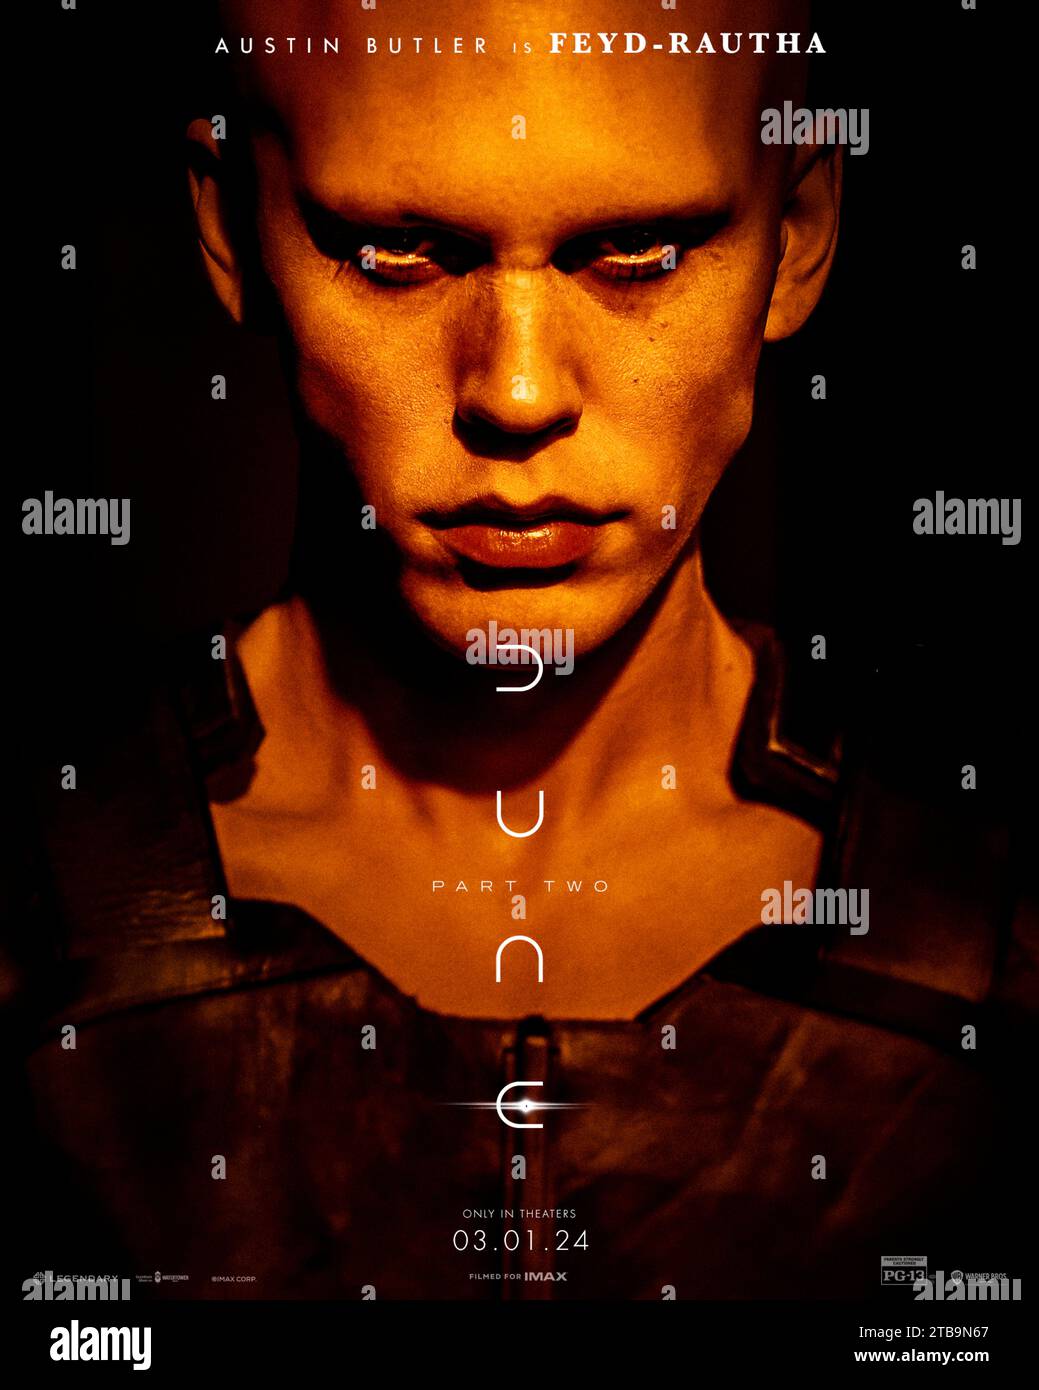 Dune: Part Two (2024) directed by Denis Villeneuve and starring Austin Butler as Feyd-Rautha in this big screen adaptation of Frank Herbert's sci-fi masterpiece. Paul Atreides unites with Chani and the Fremen while seeking revenge against the conspirators who destroyed his family. US character poster ***EDITORIAL USE ONLY***. Credit: BFA / Warner Bros Stock Photo